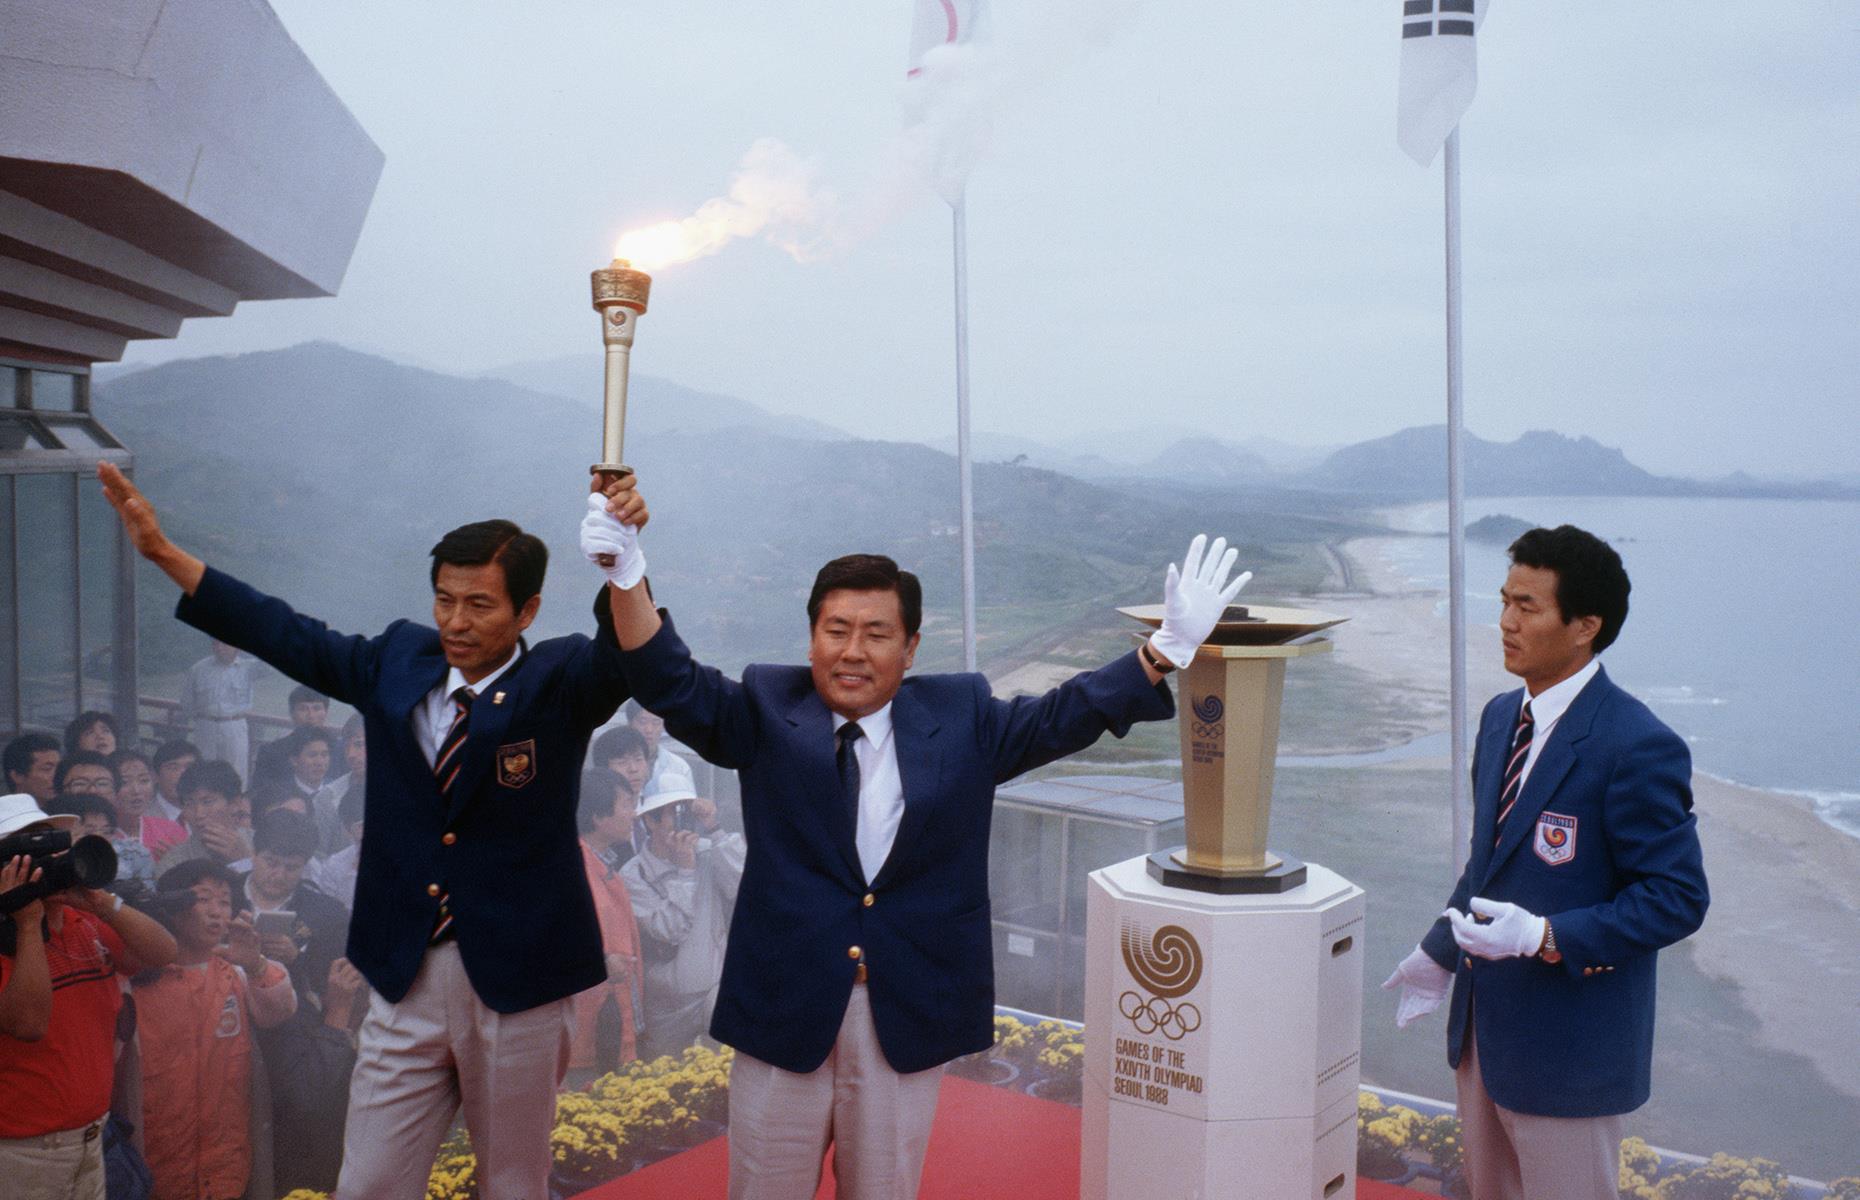 <p>South Korea was booming in the late 1980s – Seoul was gearing up to host the 1988 Olympics (pictured) and the country was part-way through transitioning into a capitalist democracy. The North naturally boycotted the Olympics and, as a response, organized the World Festival of Youth and Students in Pyongyang in 1989. The Ryugyong Hotel was supposed to be ready for the event – to debut on the world stage as a symbol of North Korean greatness. But thanks to a series of engineering problems, it was unfinished when the festival began.</p>